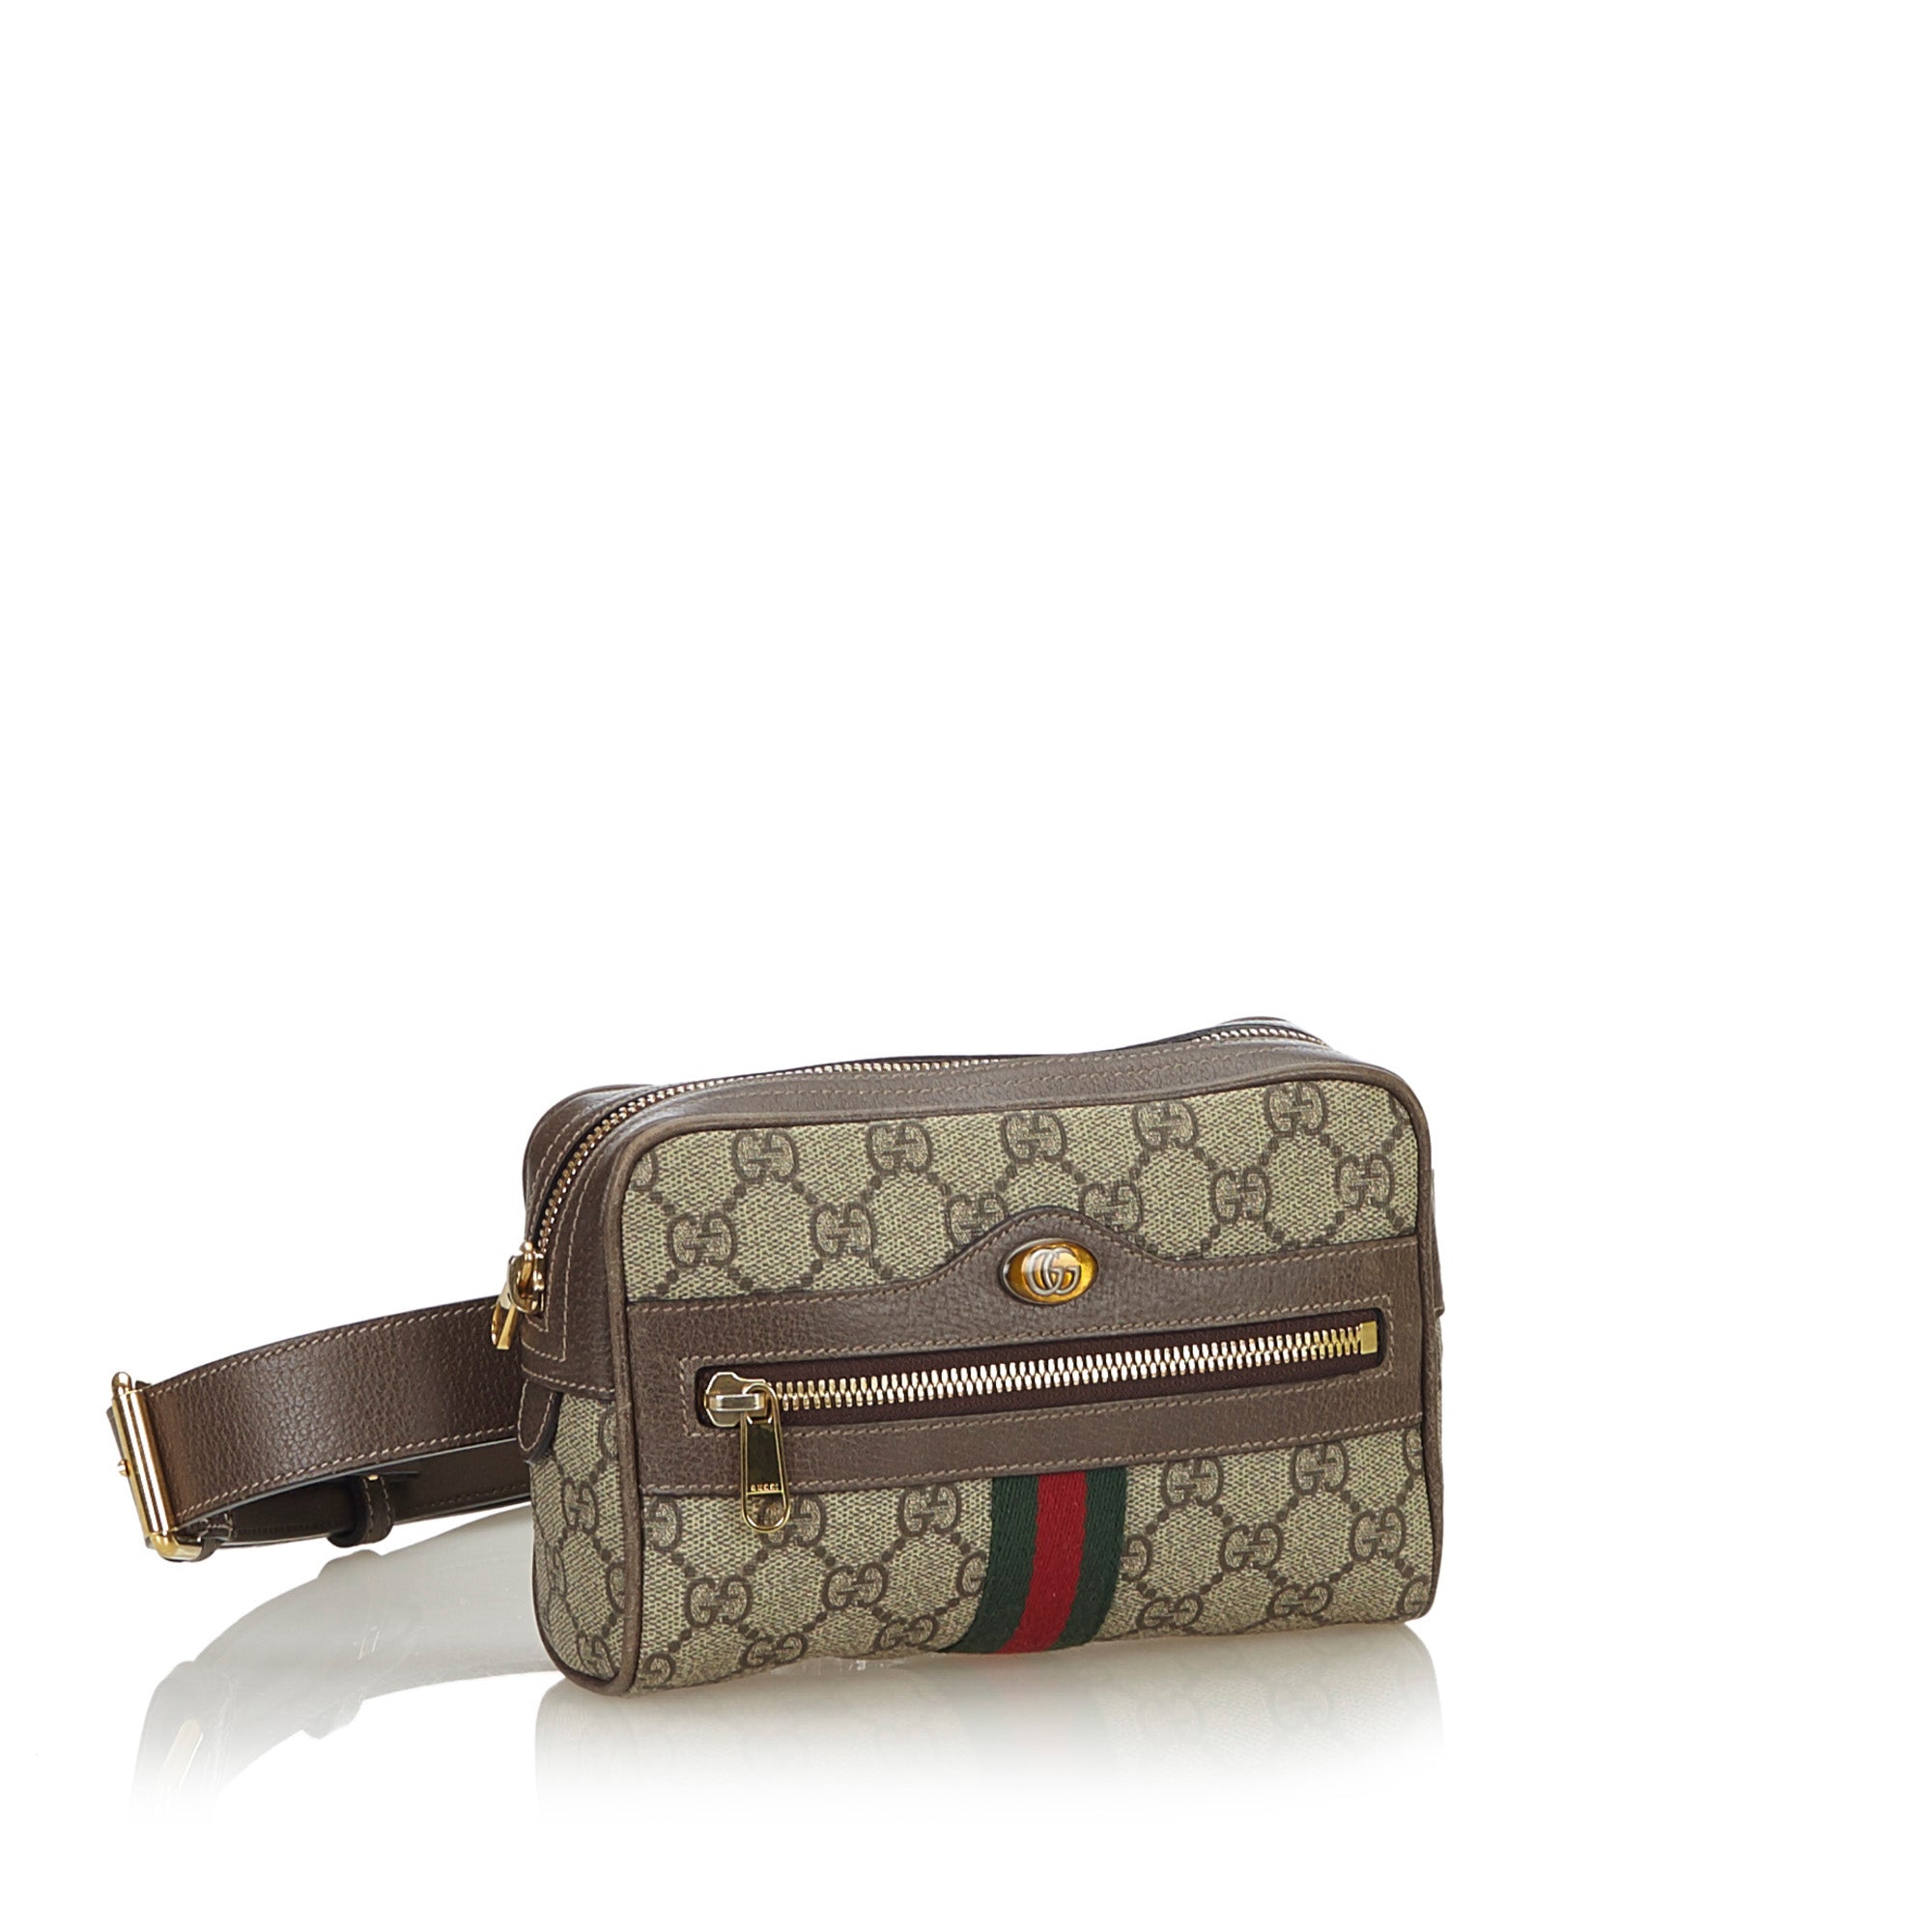 Buy & Consign Authentic Gucci GG Supreme Web Ophidia Belt Bag at The Plush Posh